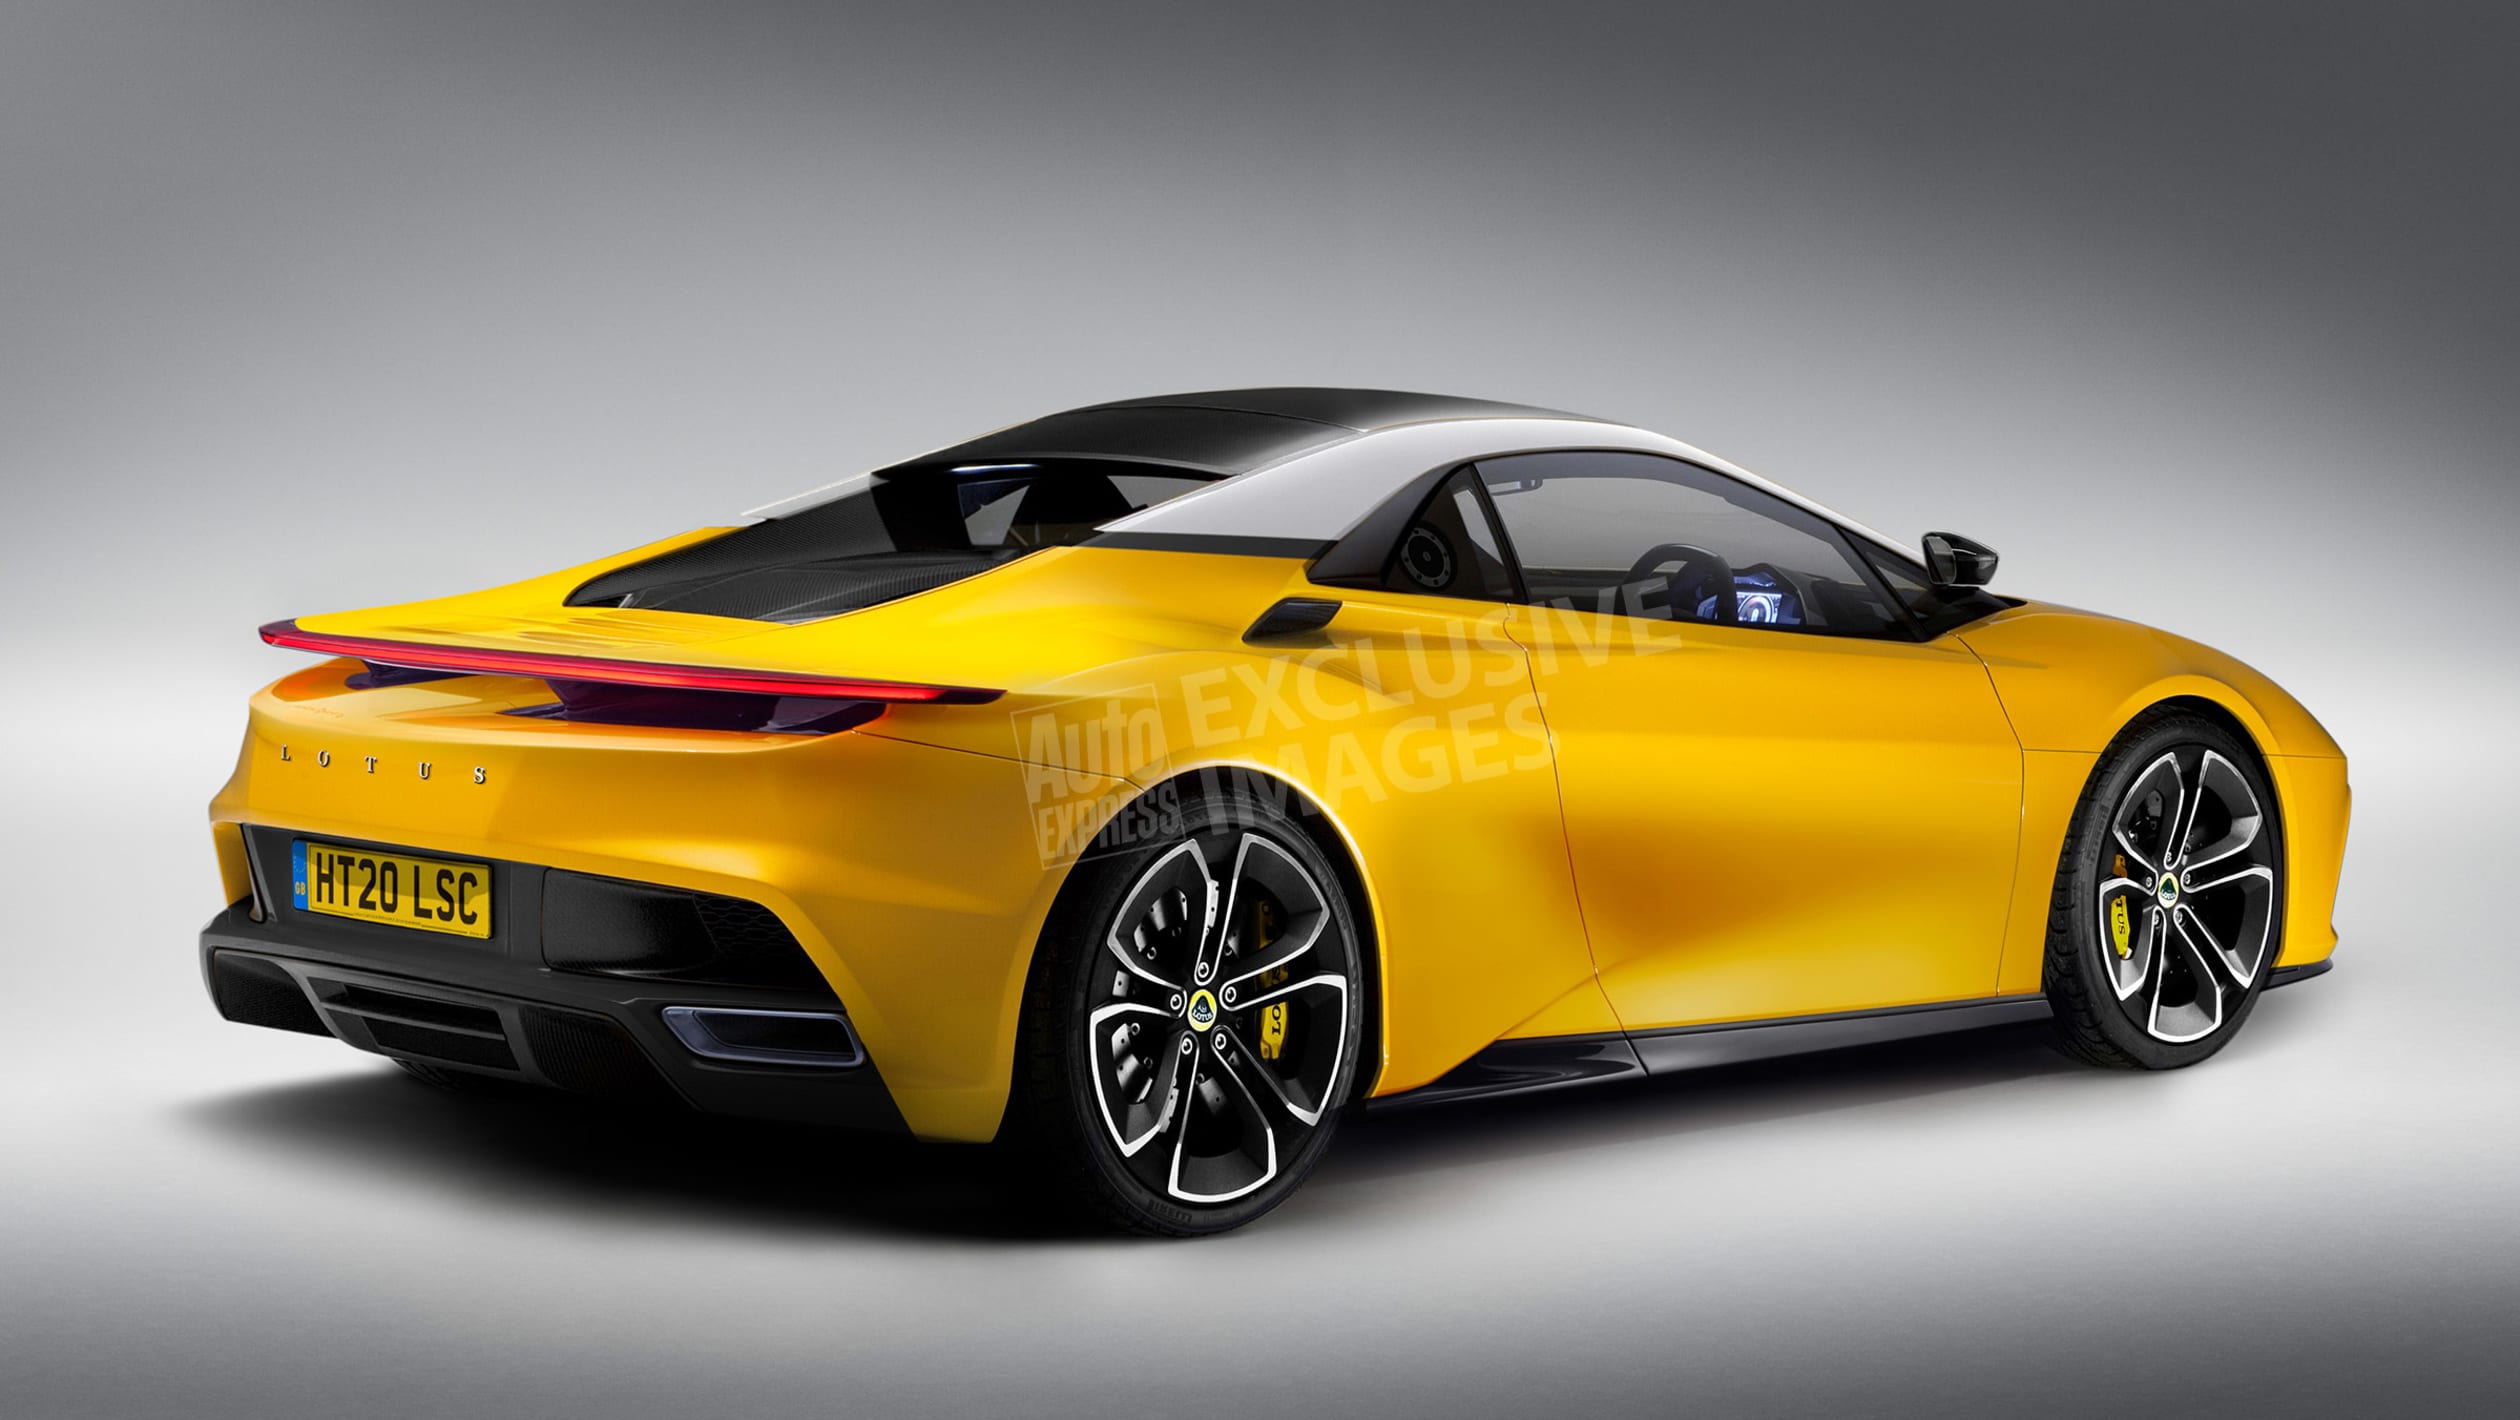 New 2020 Lotus sports car to be brand’s first electrified model Auto